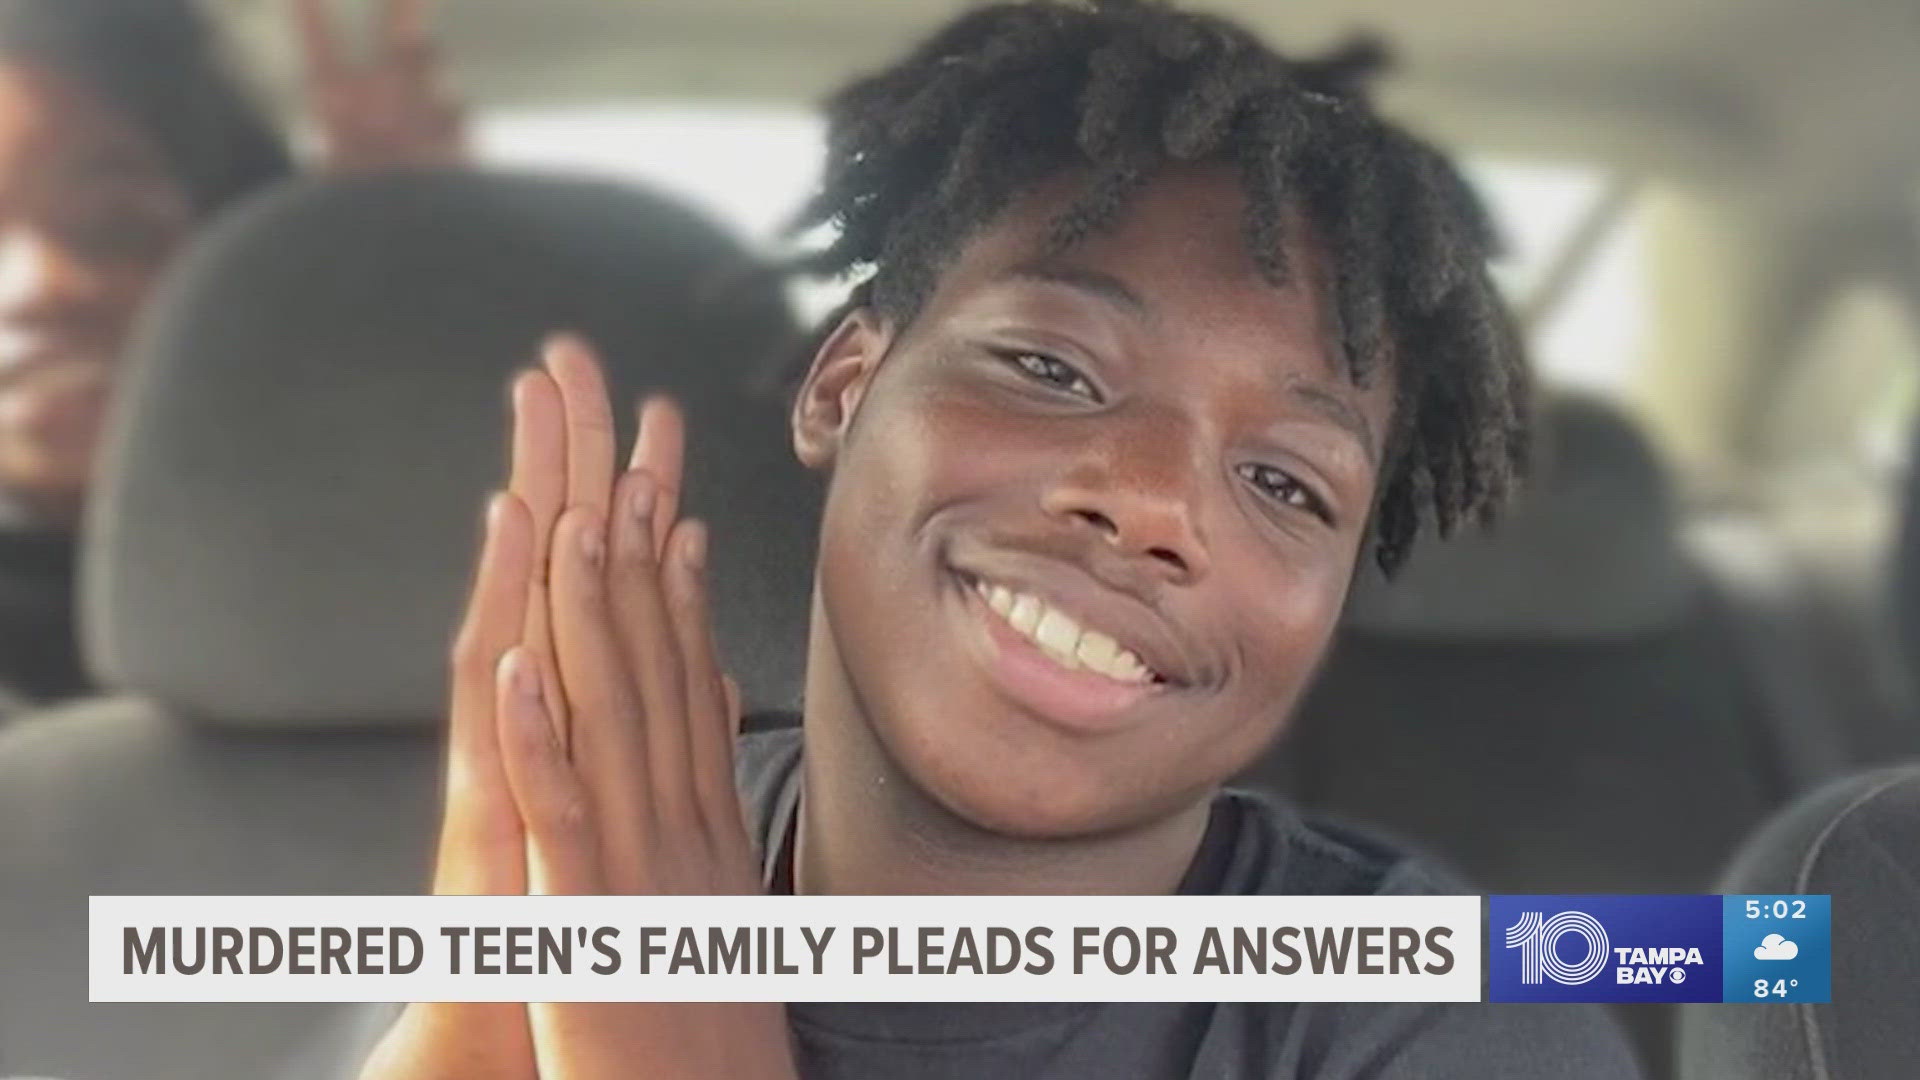 Jevario Buie is remembered as a good kid who stayed out of trouble. His family worries he may have been confronting a bully before he was murdered.